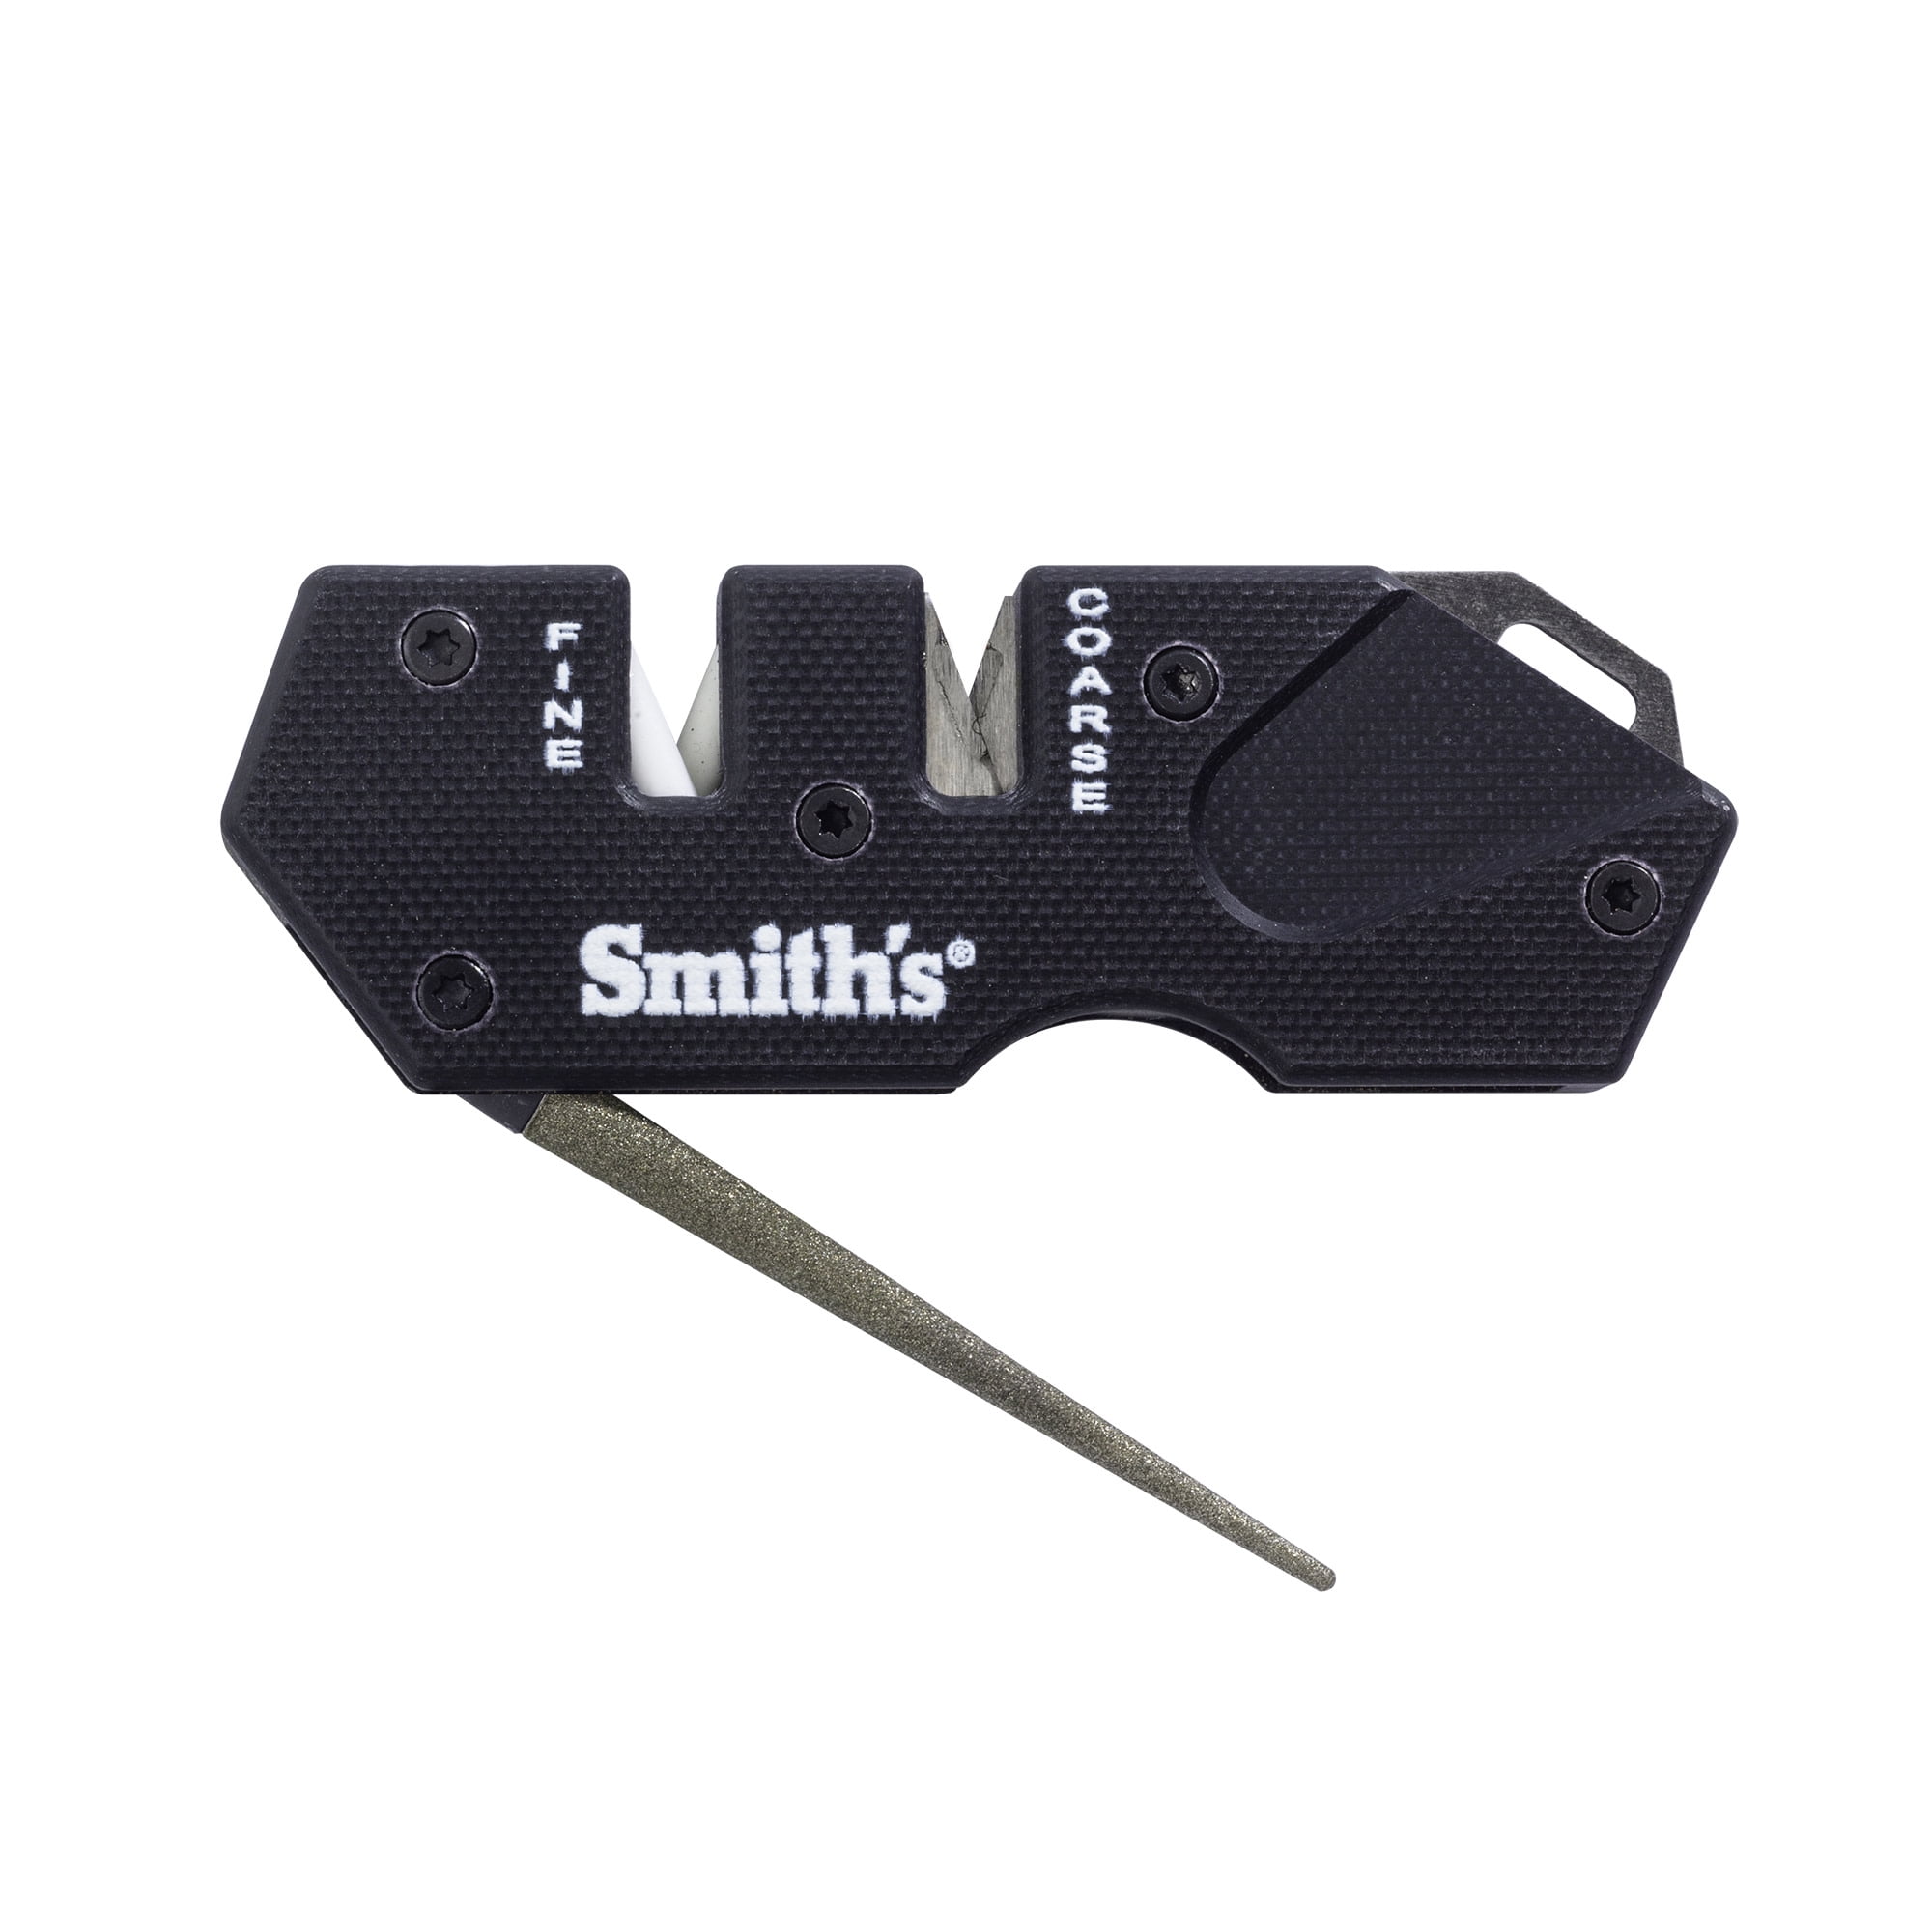 Smith's Sharpeners PackPal Combination Sharpener - Blade HQ